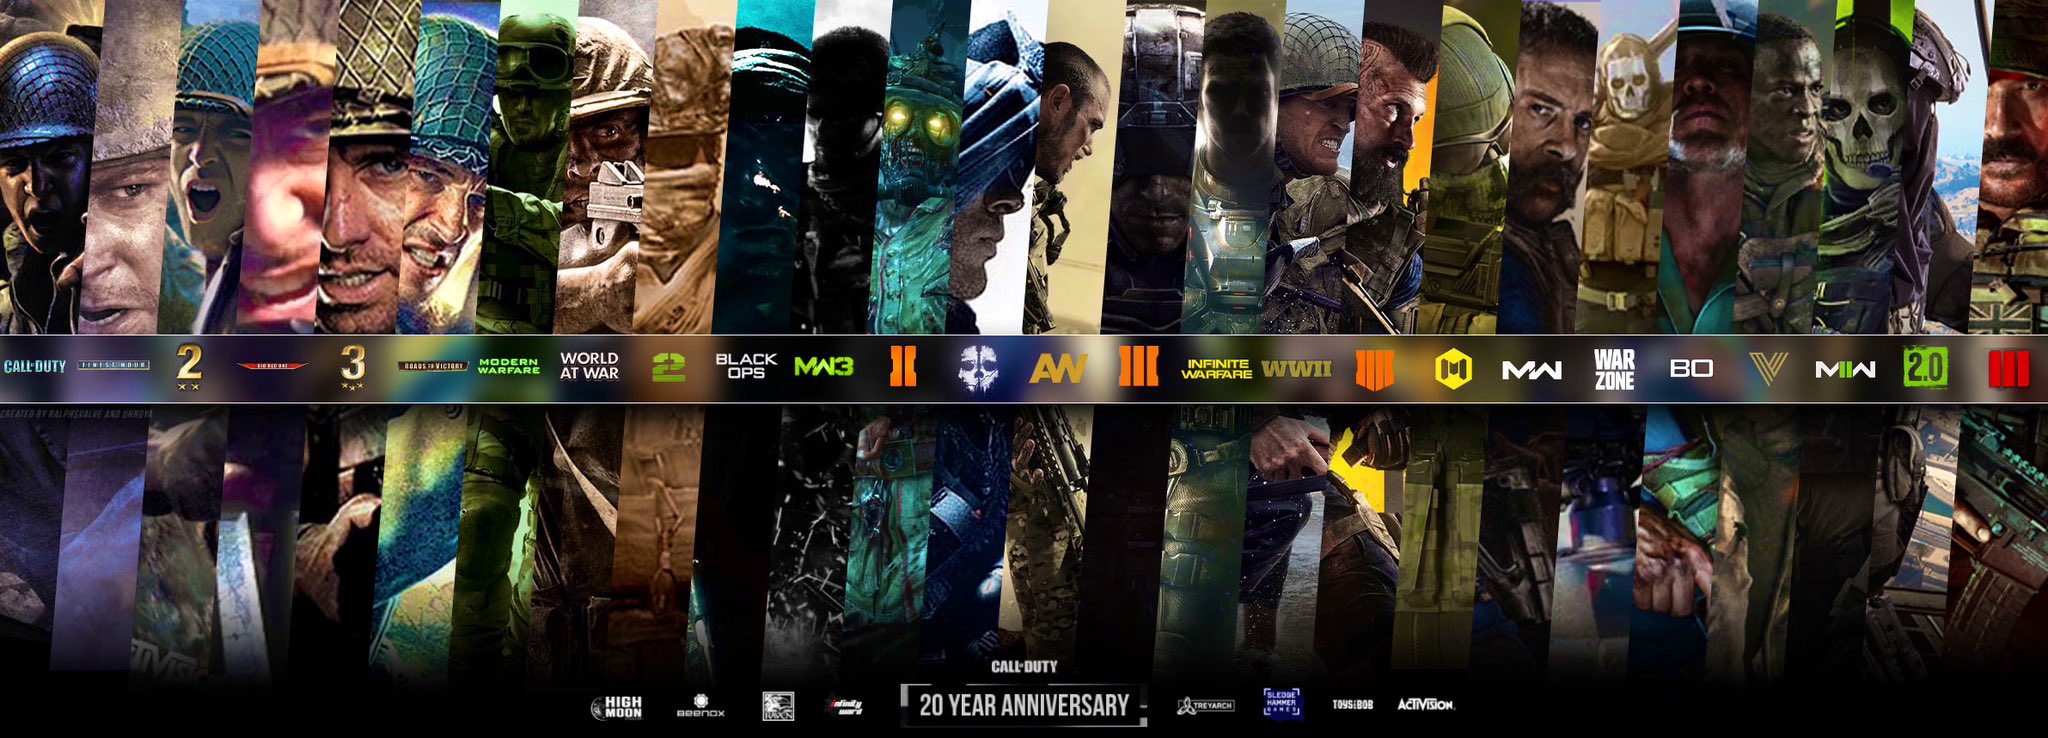 Call of Duty Celebrates its 20th Anniversary